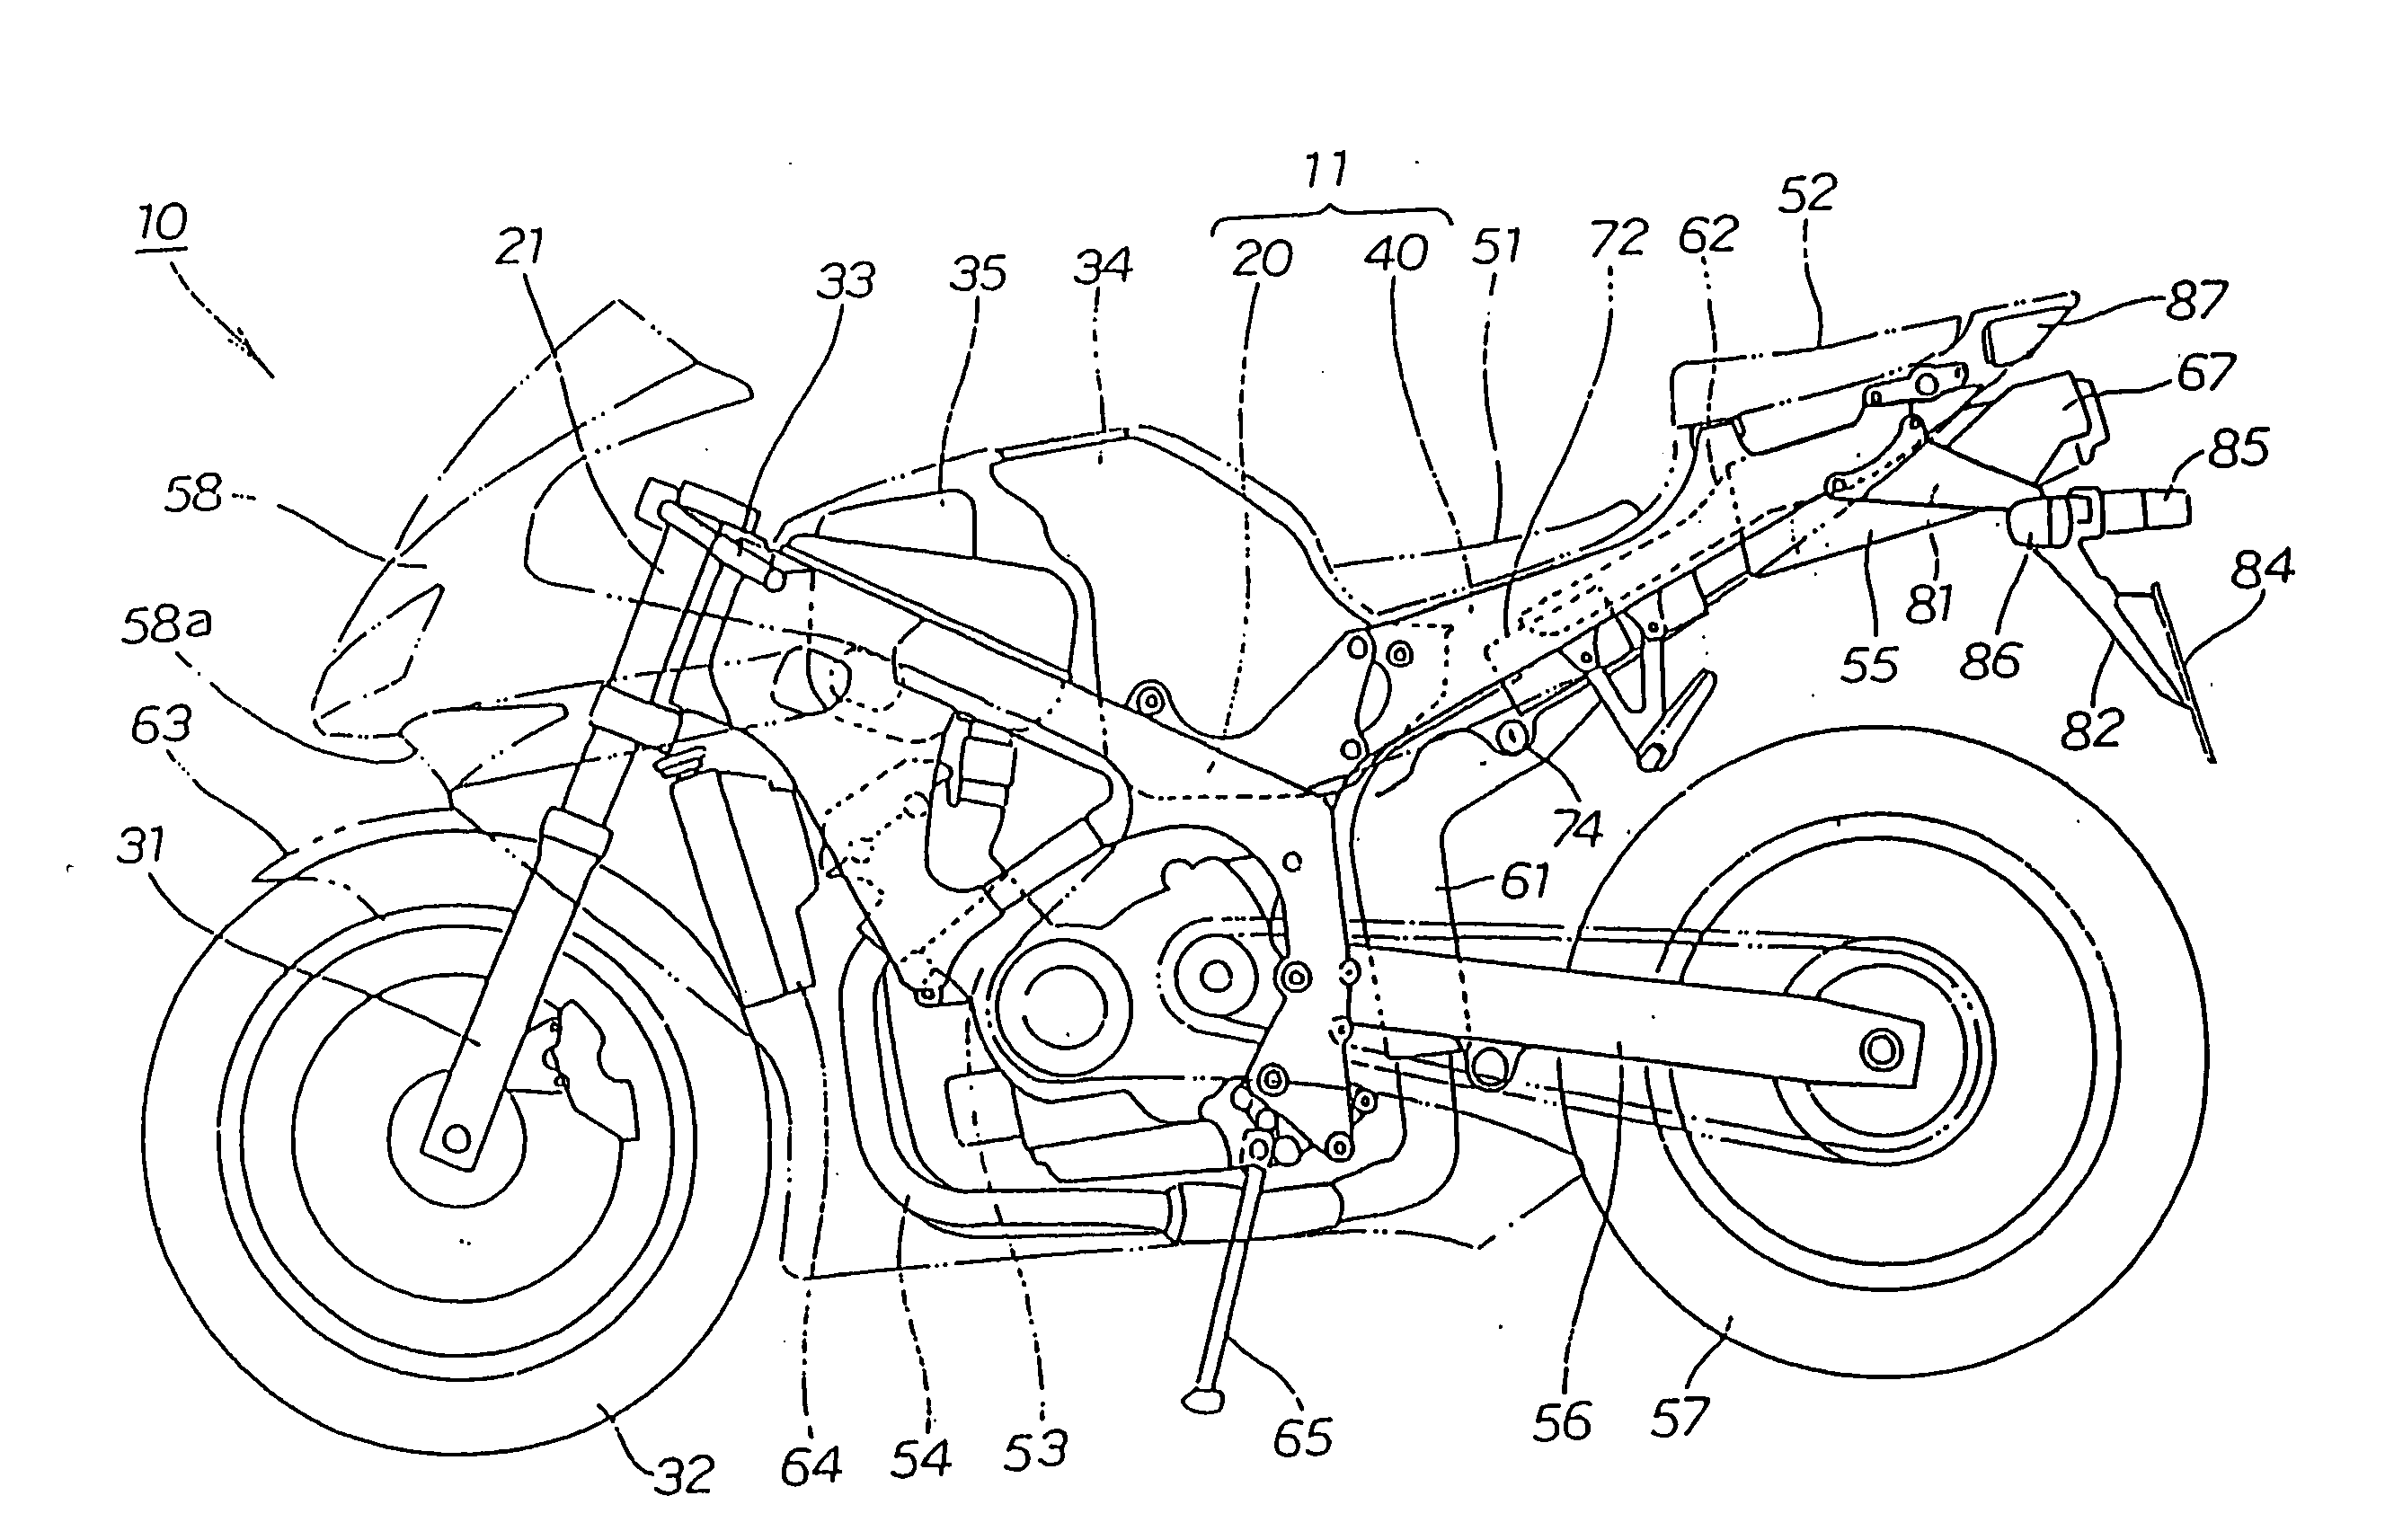 Engine fuel injection apparatus